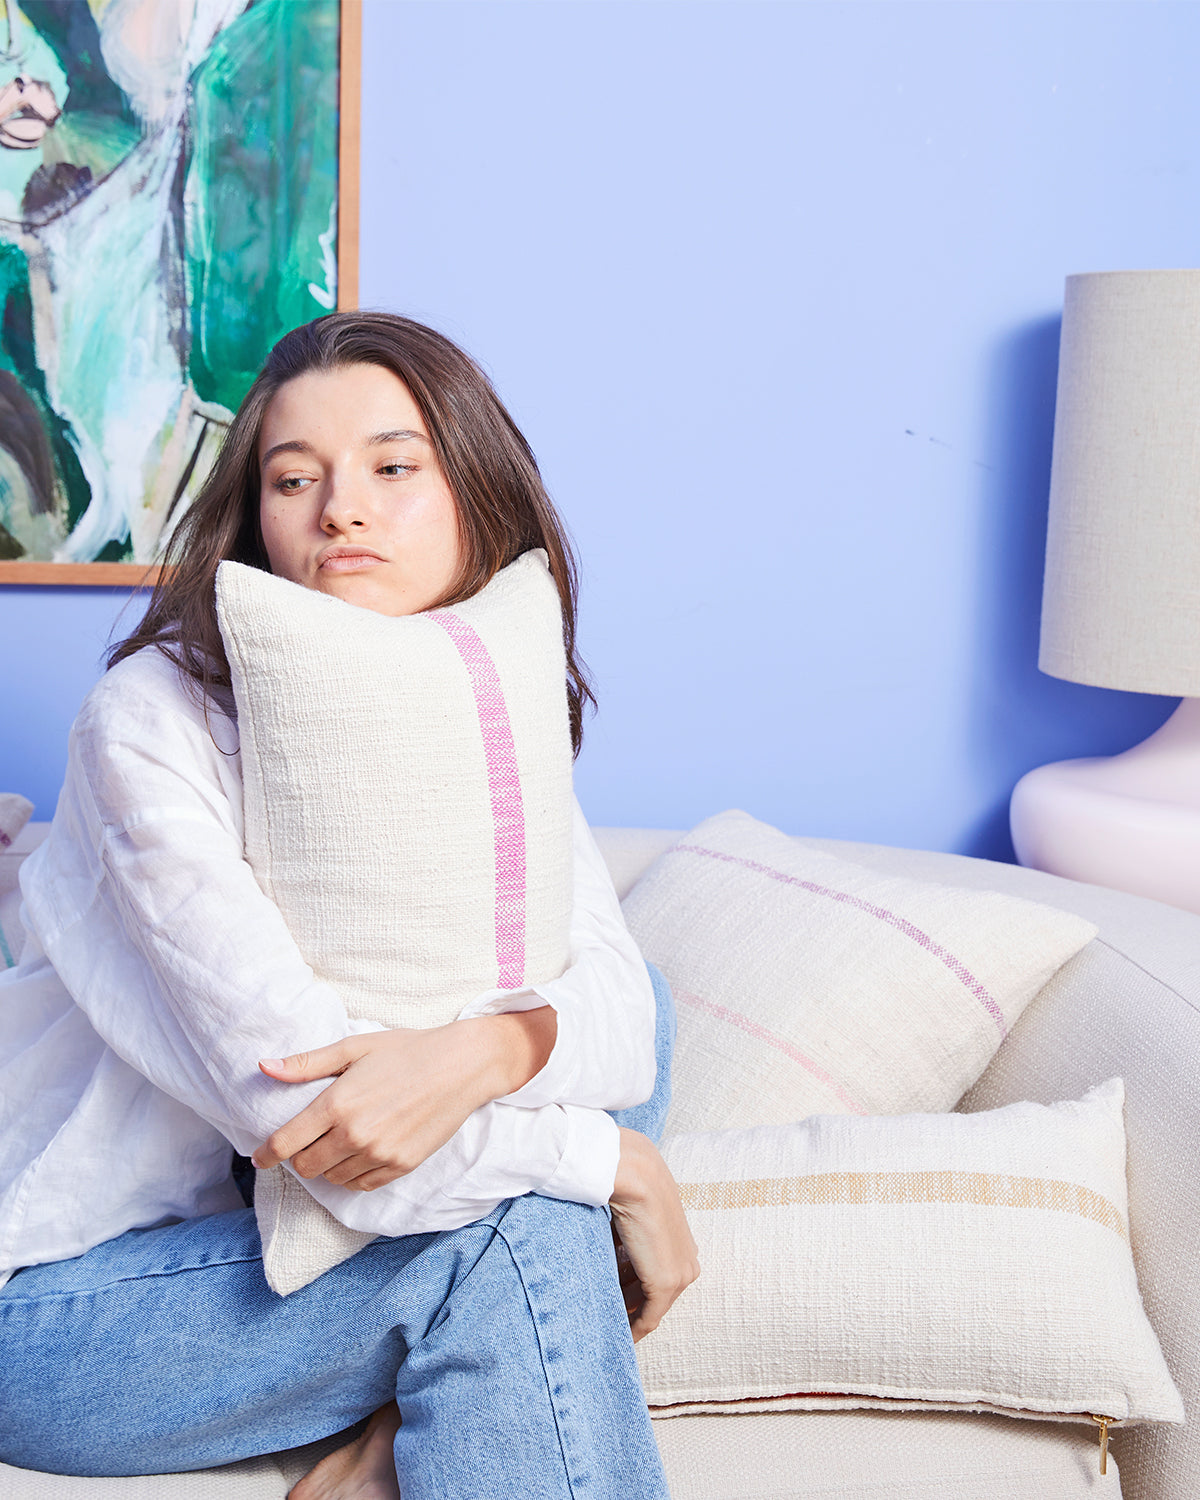 Woman sitting holding a striped pillow on a couch filled with pillows